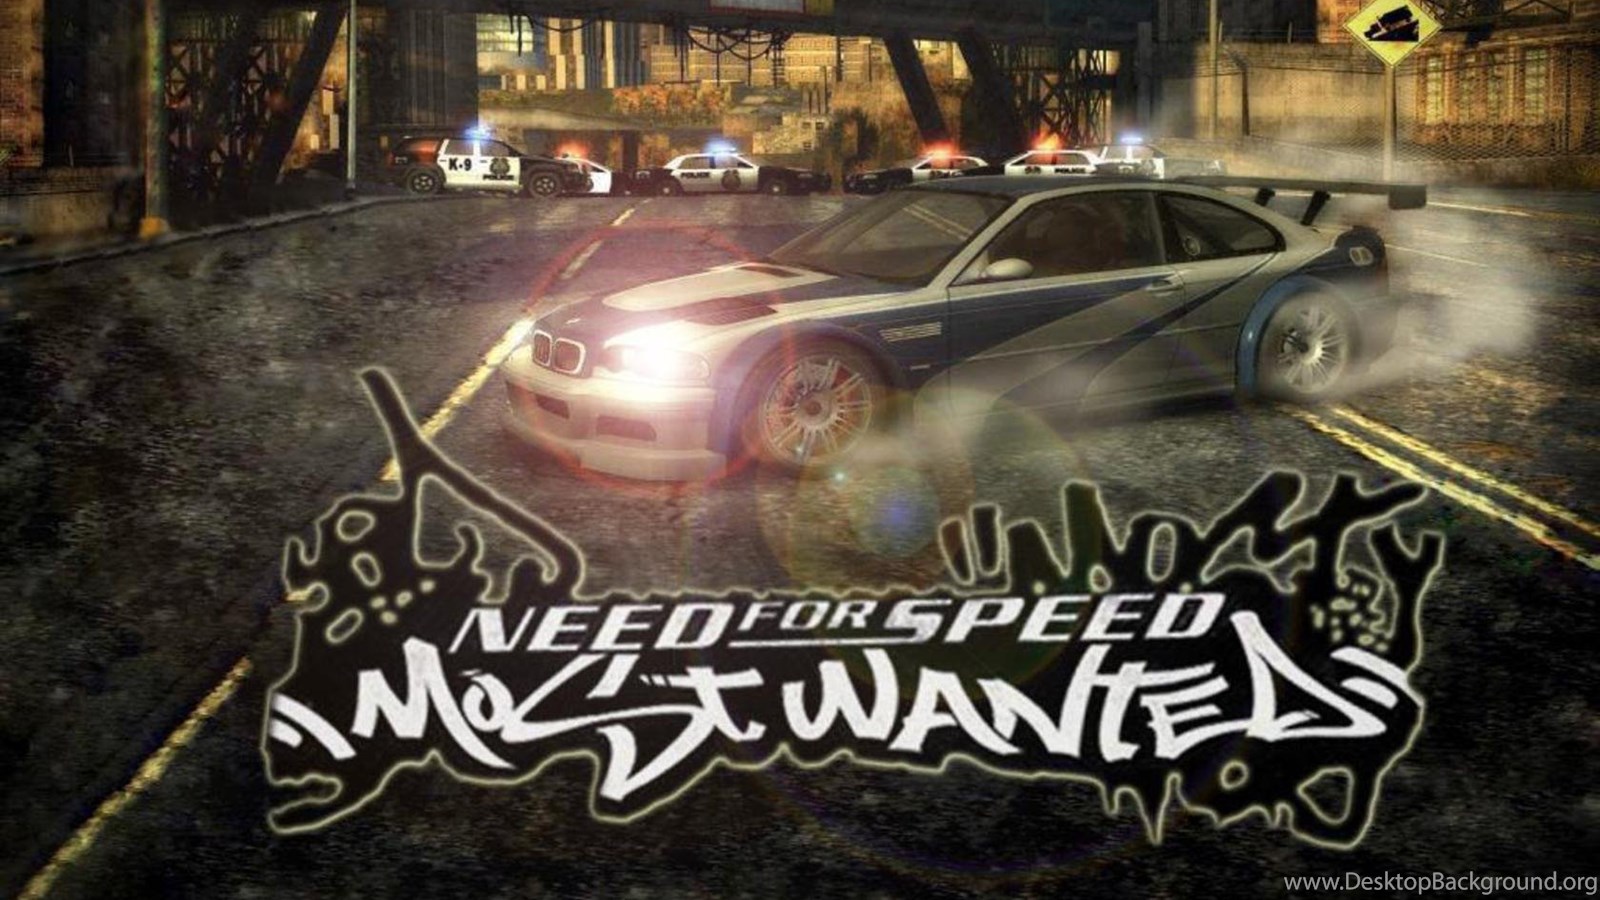 Музыка из игры most wanted. Новый NFS most wanted 2005. Most wanted 2005 геймплей. Need for Speed most wanted стрим. NFS MW 2005 Remake.